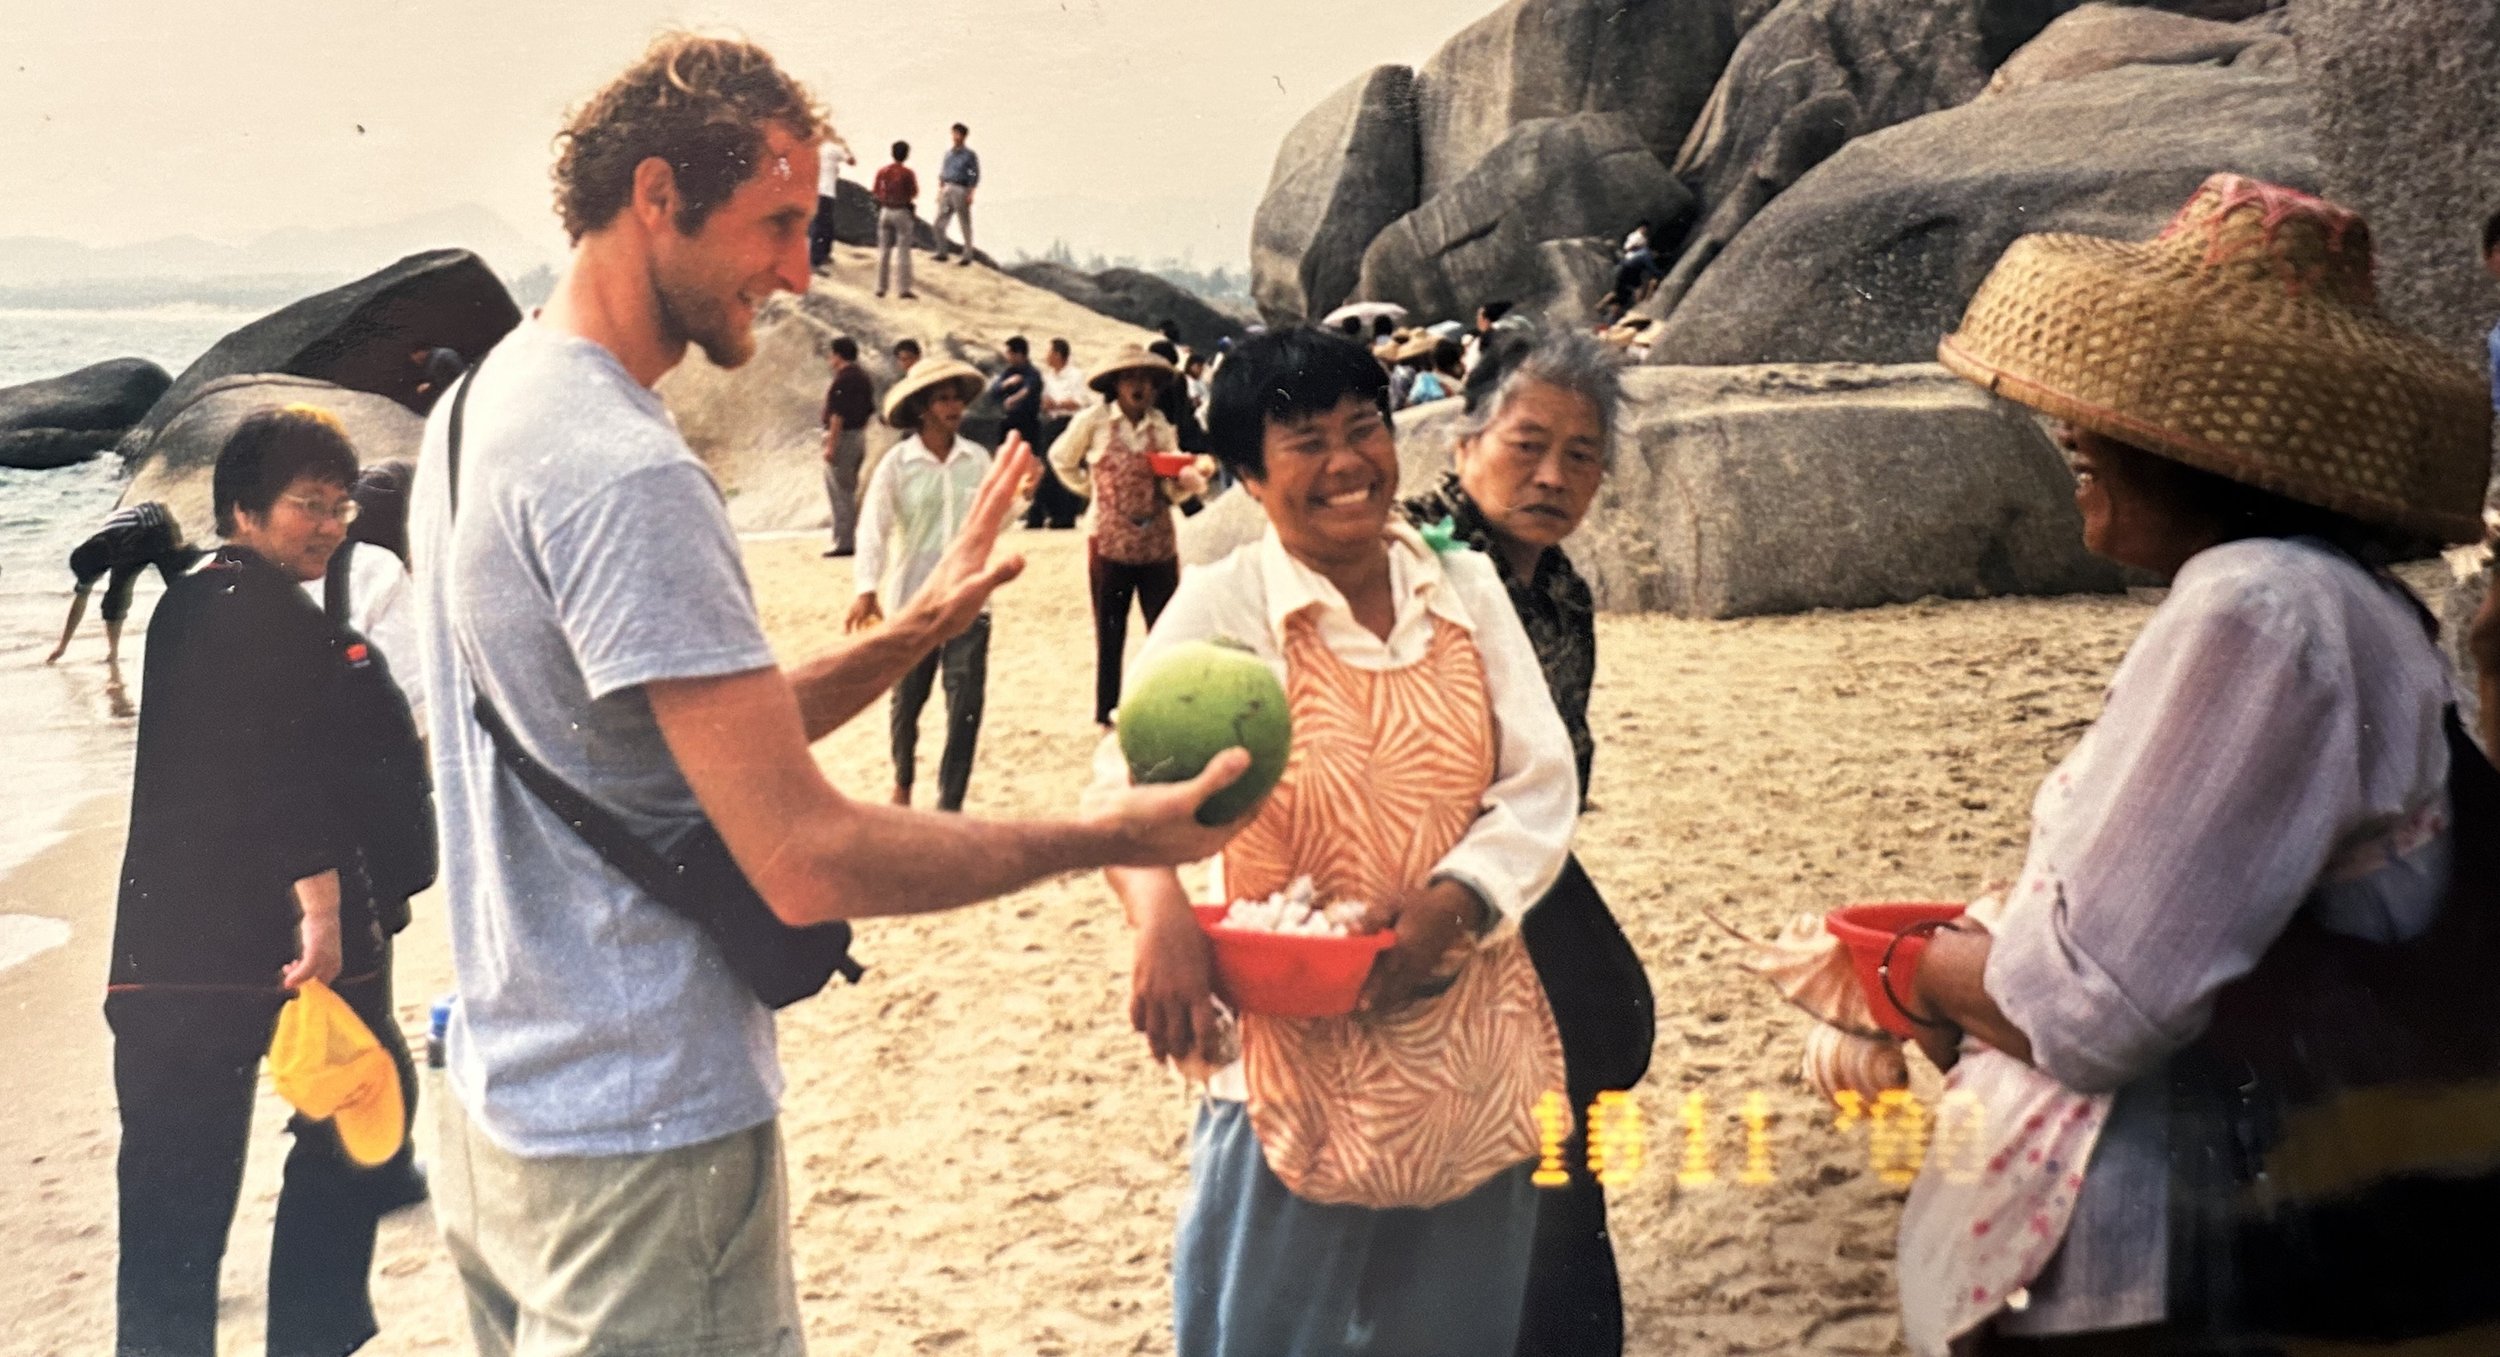 David, in Hainan, China, attempting to sell a coconut he found. The women were obviously a bit shocked he was speaking Chinese and also charging way below asking price.